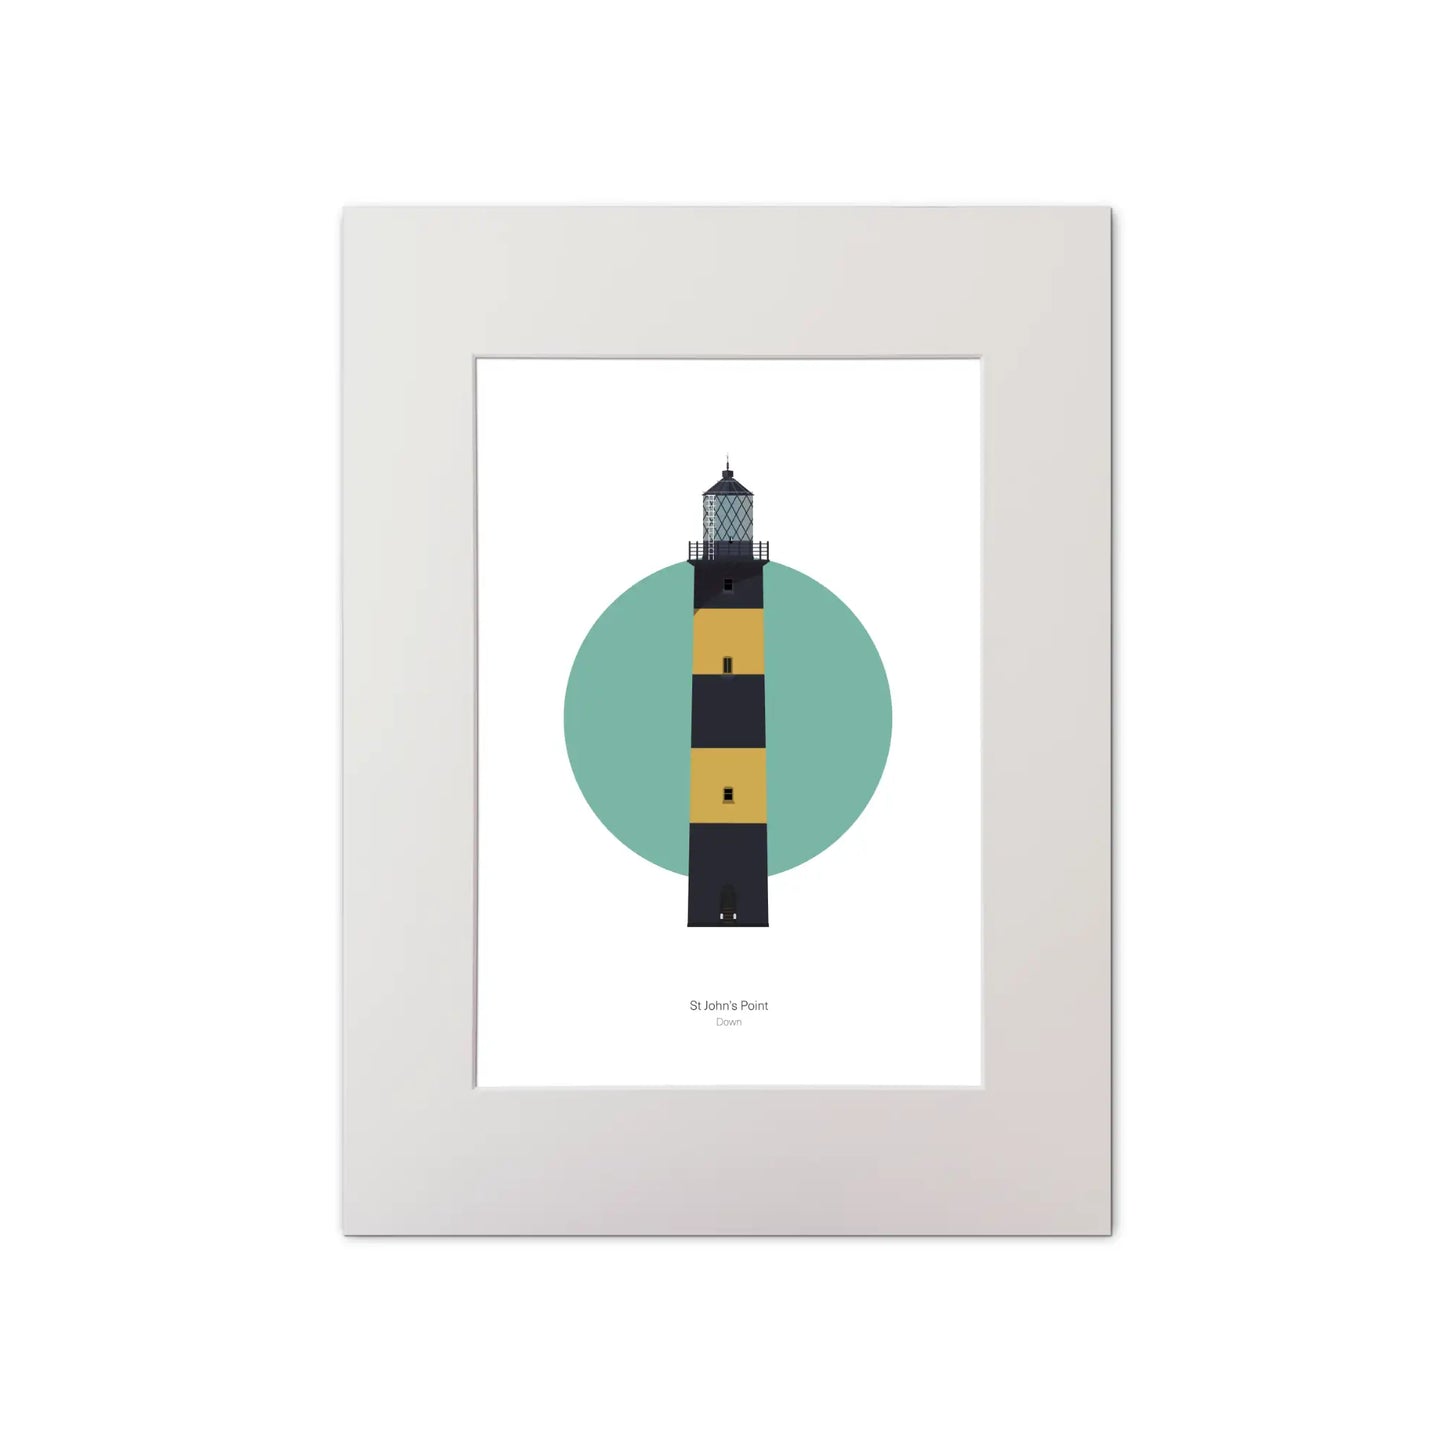 Illustration of St. John's lighthouse on a white background inside light blue square, mounted and measuring 30x40cm.